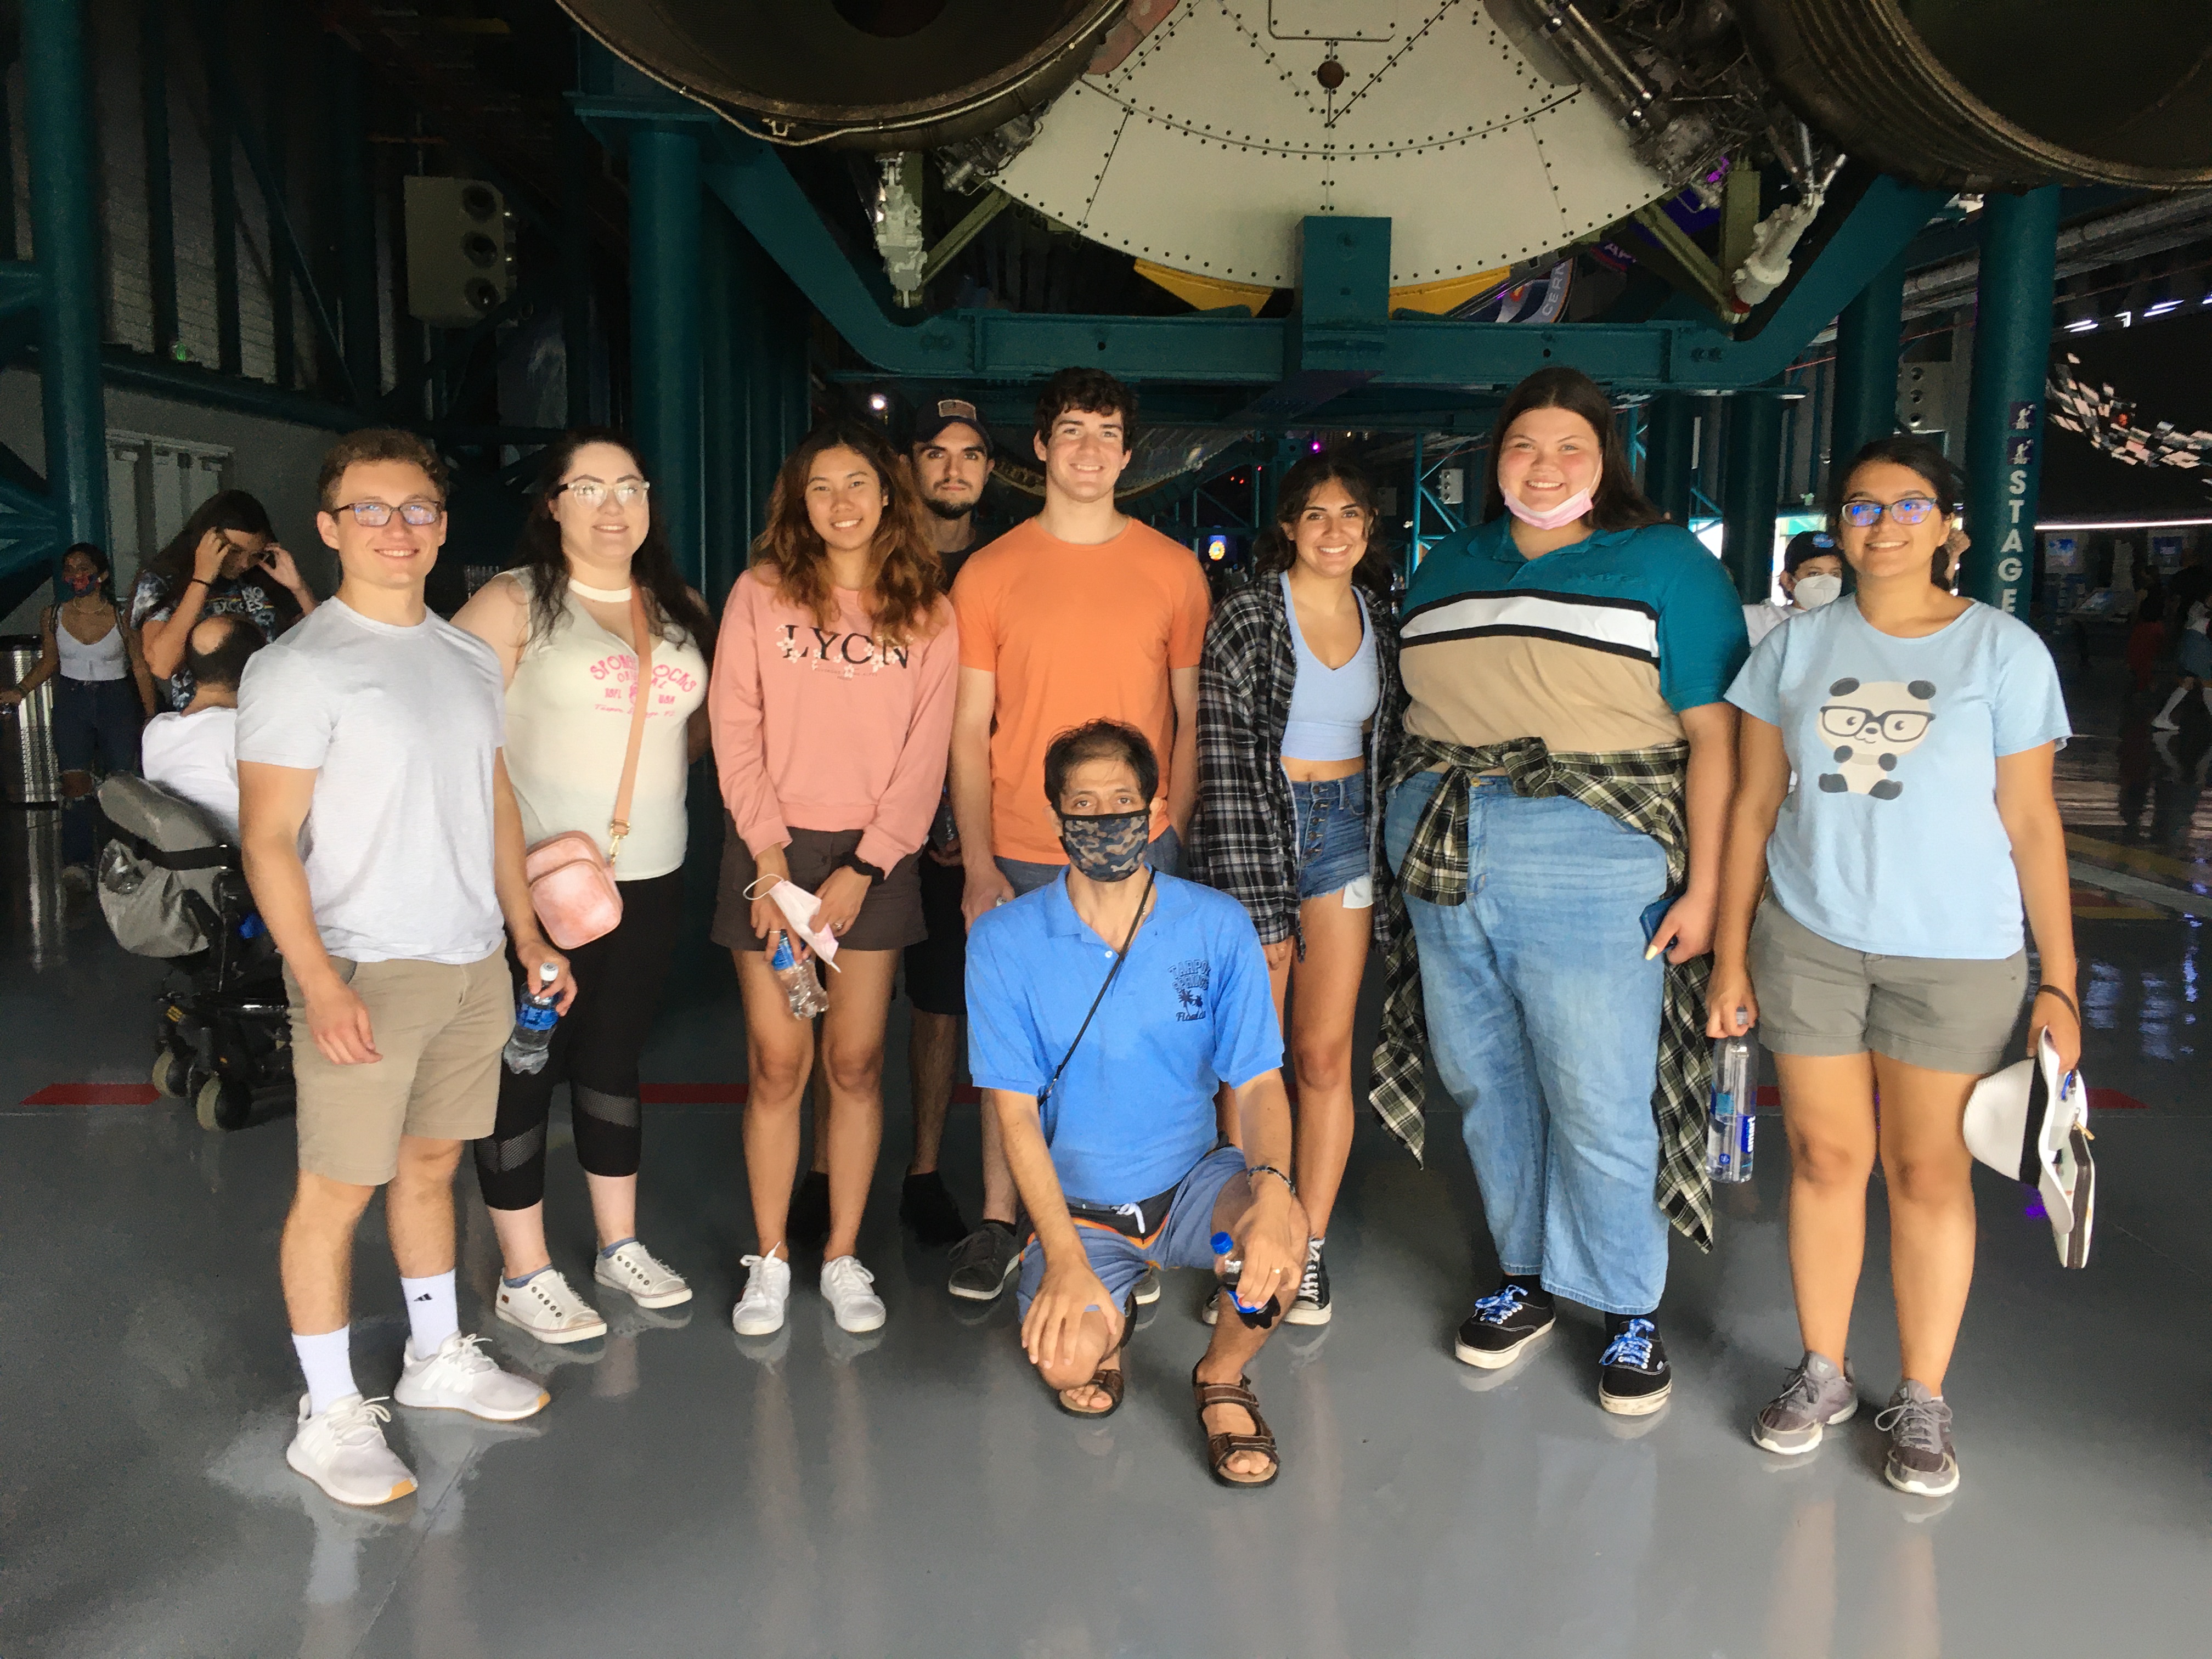 Students in front of Saturn V rocket at Kennedy Space Center